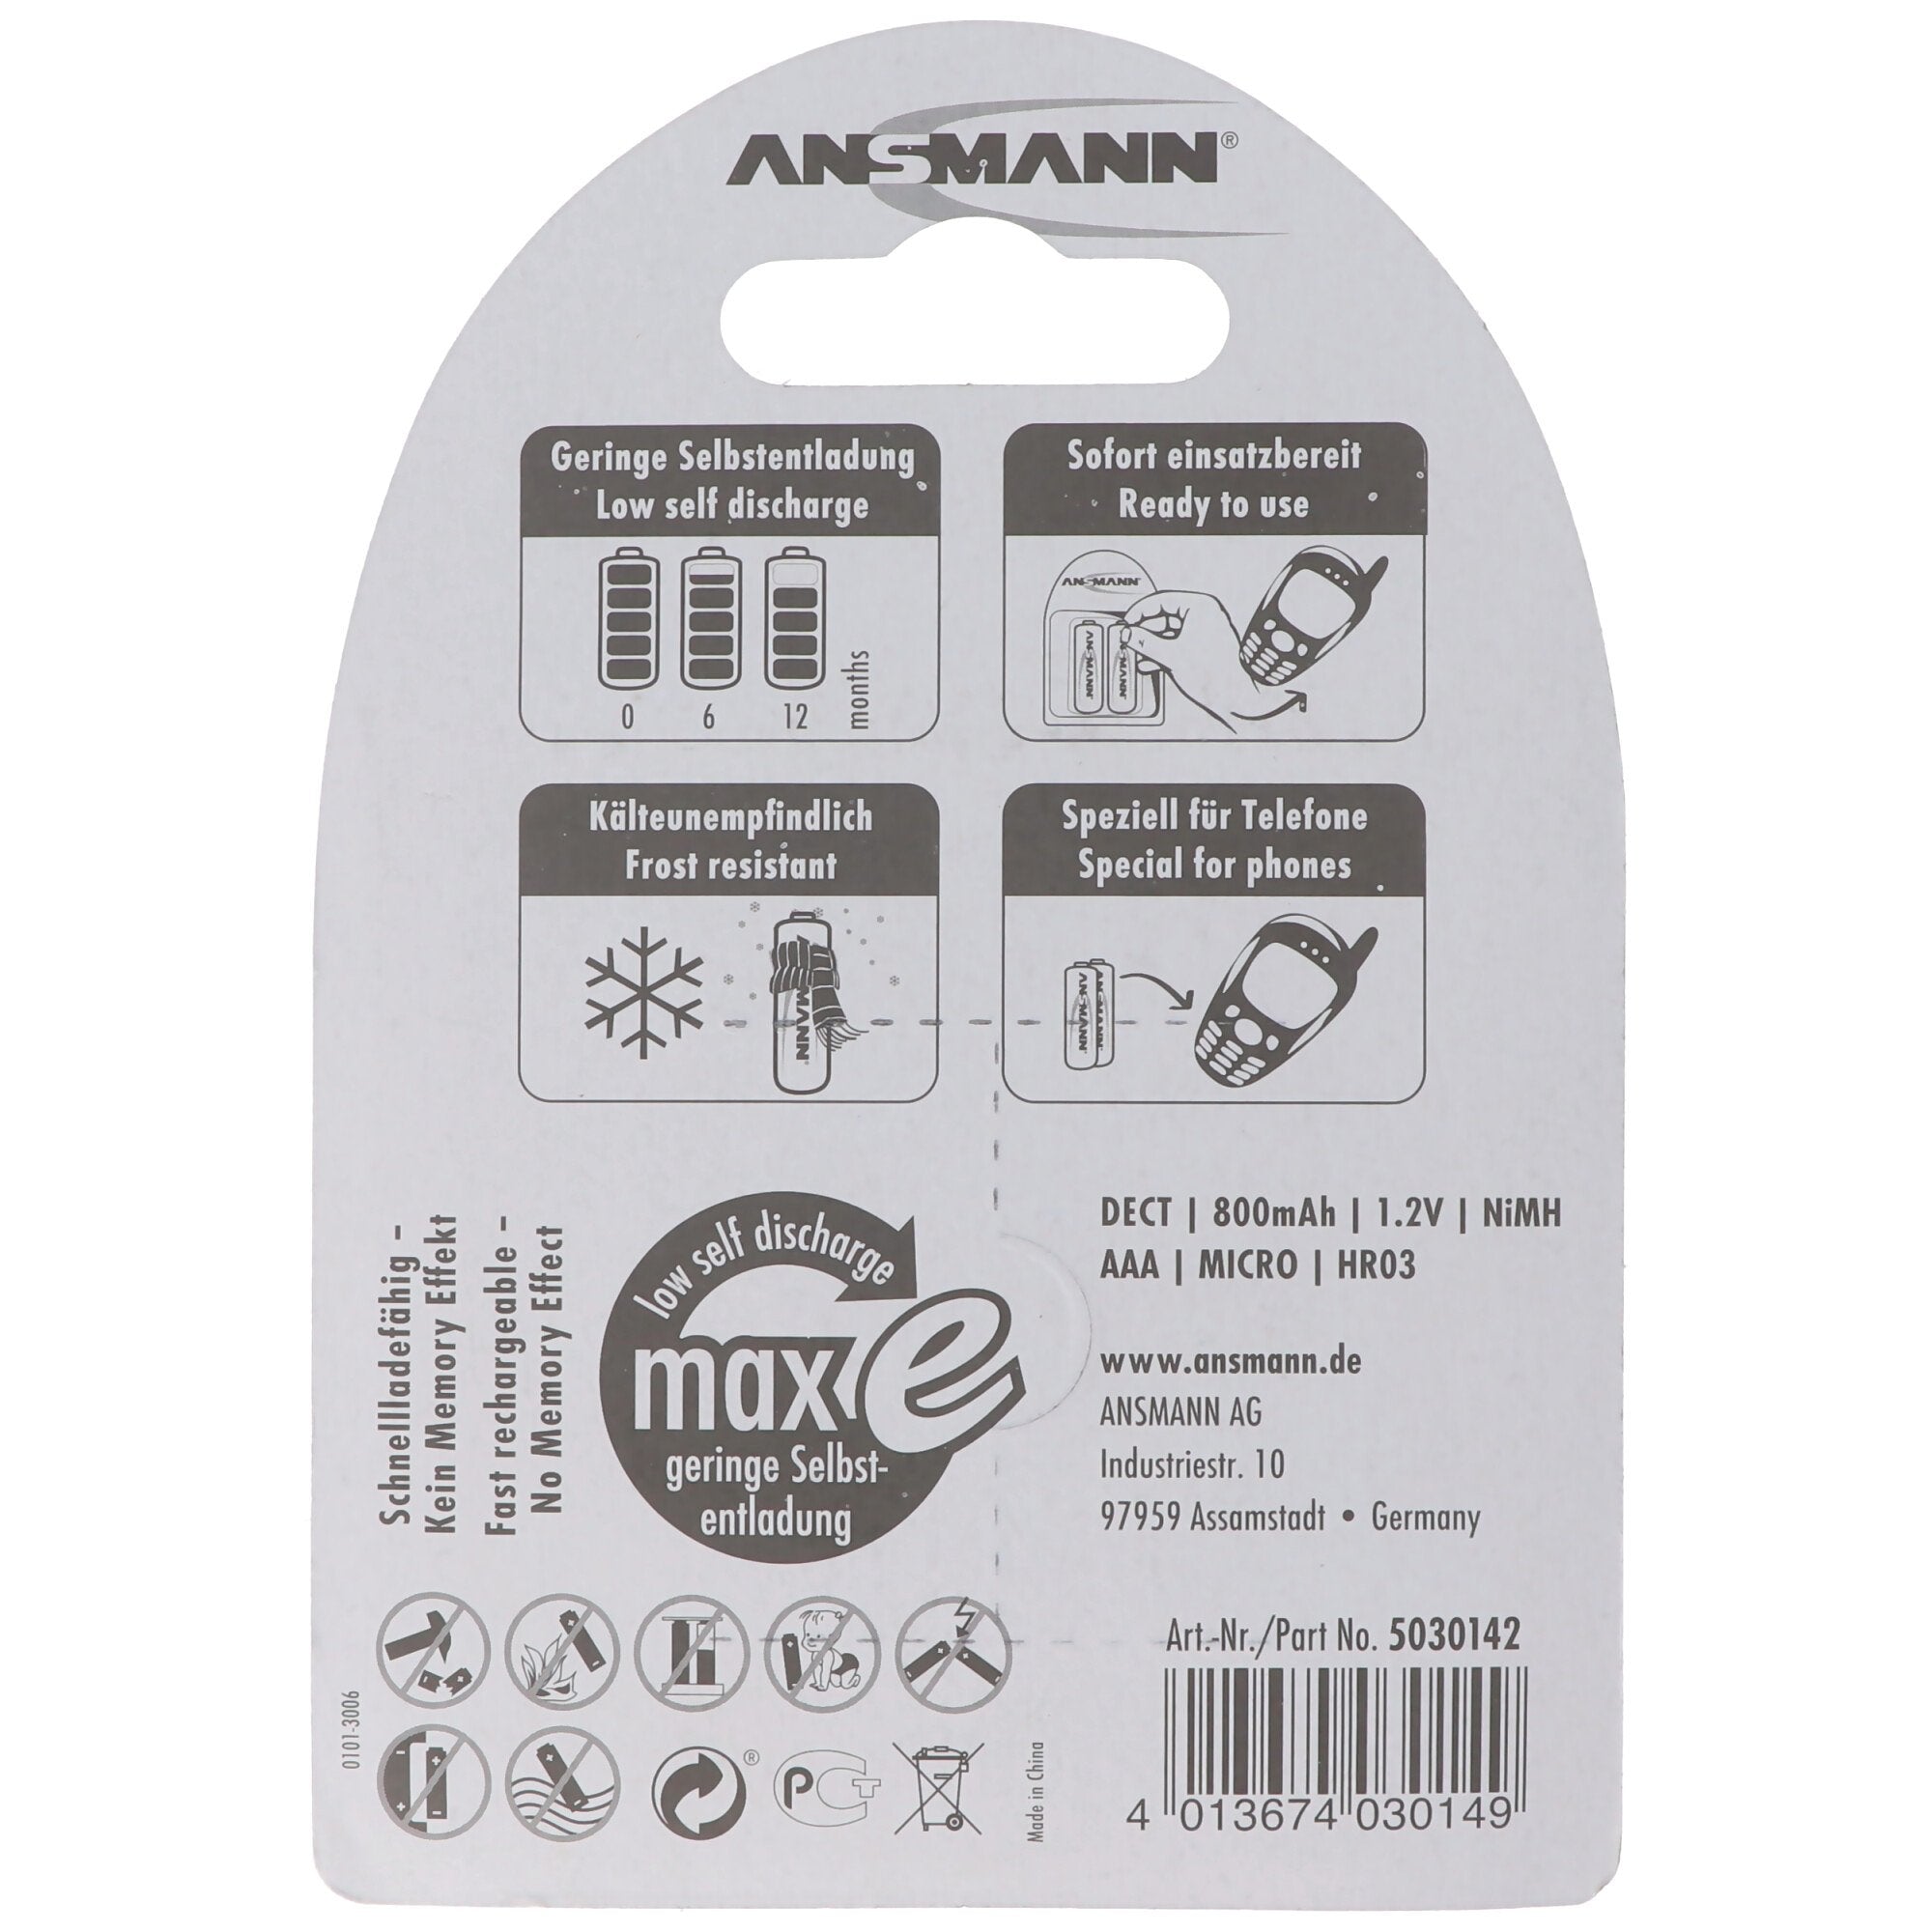 Phone battery AAA NiMH 800mAh ideal for cordless DECT phone